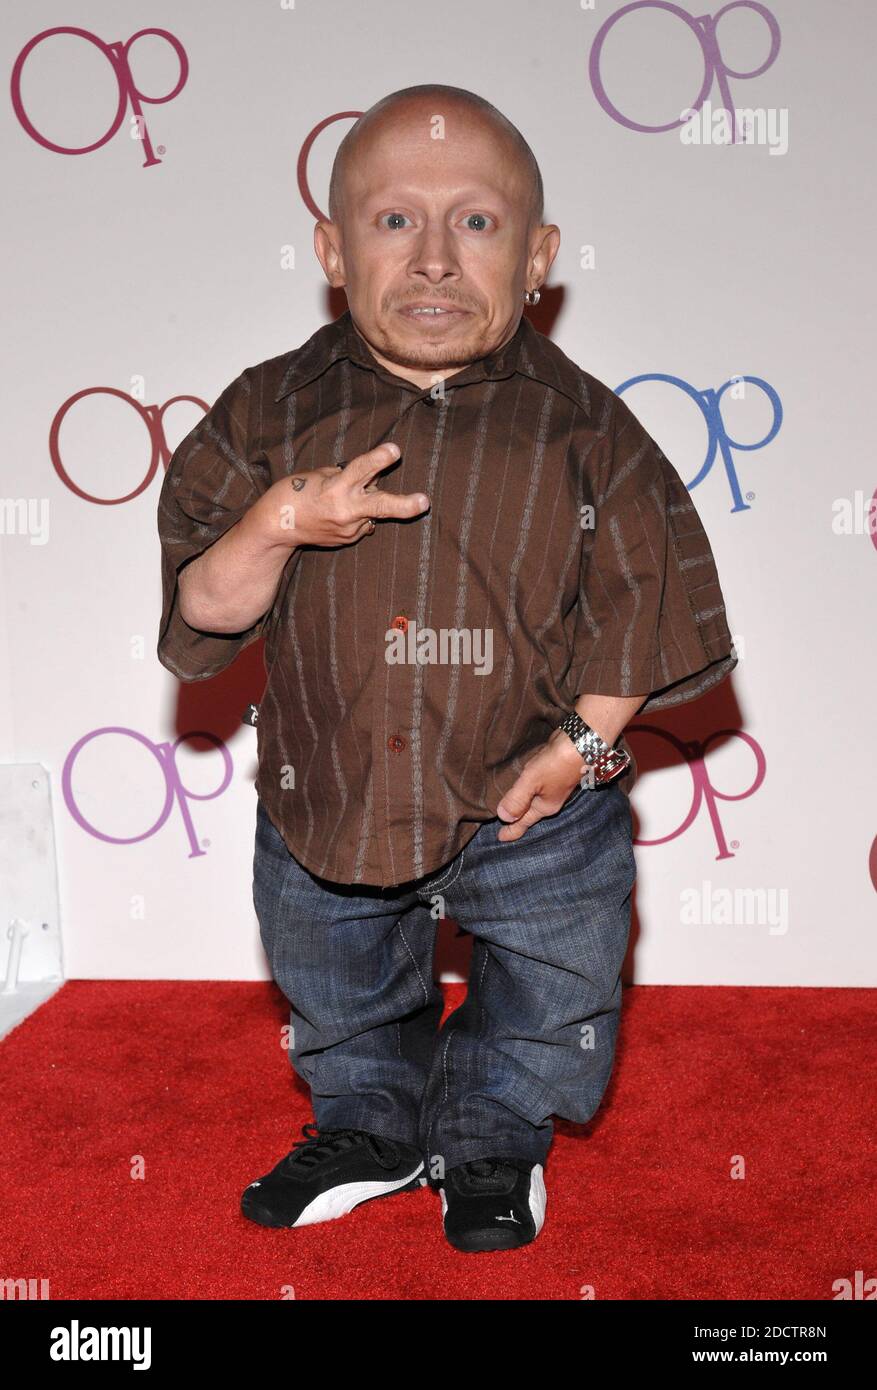 File photo - Verne Troyer arriving for the Ocean Pacific Clothing Line Party held in a private residence in Beverly Hills, Los Angeles, CA, USA on June 3, 2008. Verne Troyer, who is best known for playing Mini-Me in the Austin Powers films, has died at the age of 49. Troyer, who was 81cm tall, also played Griphook in the first Harry Potter film. Photo by Lionel Hahn/ABACAPRESS.COM Stock Photo